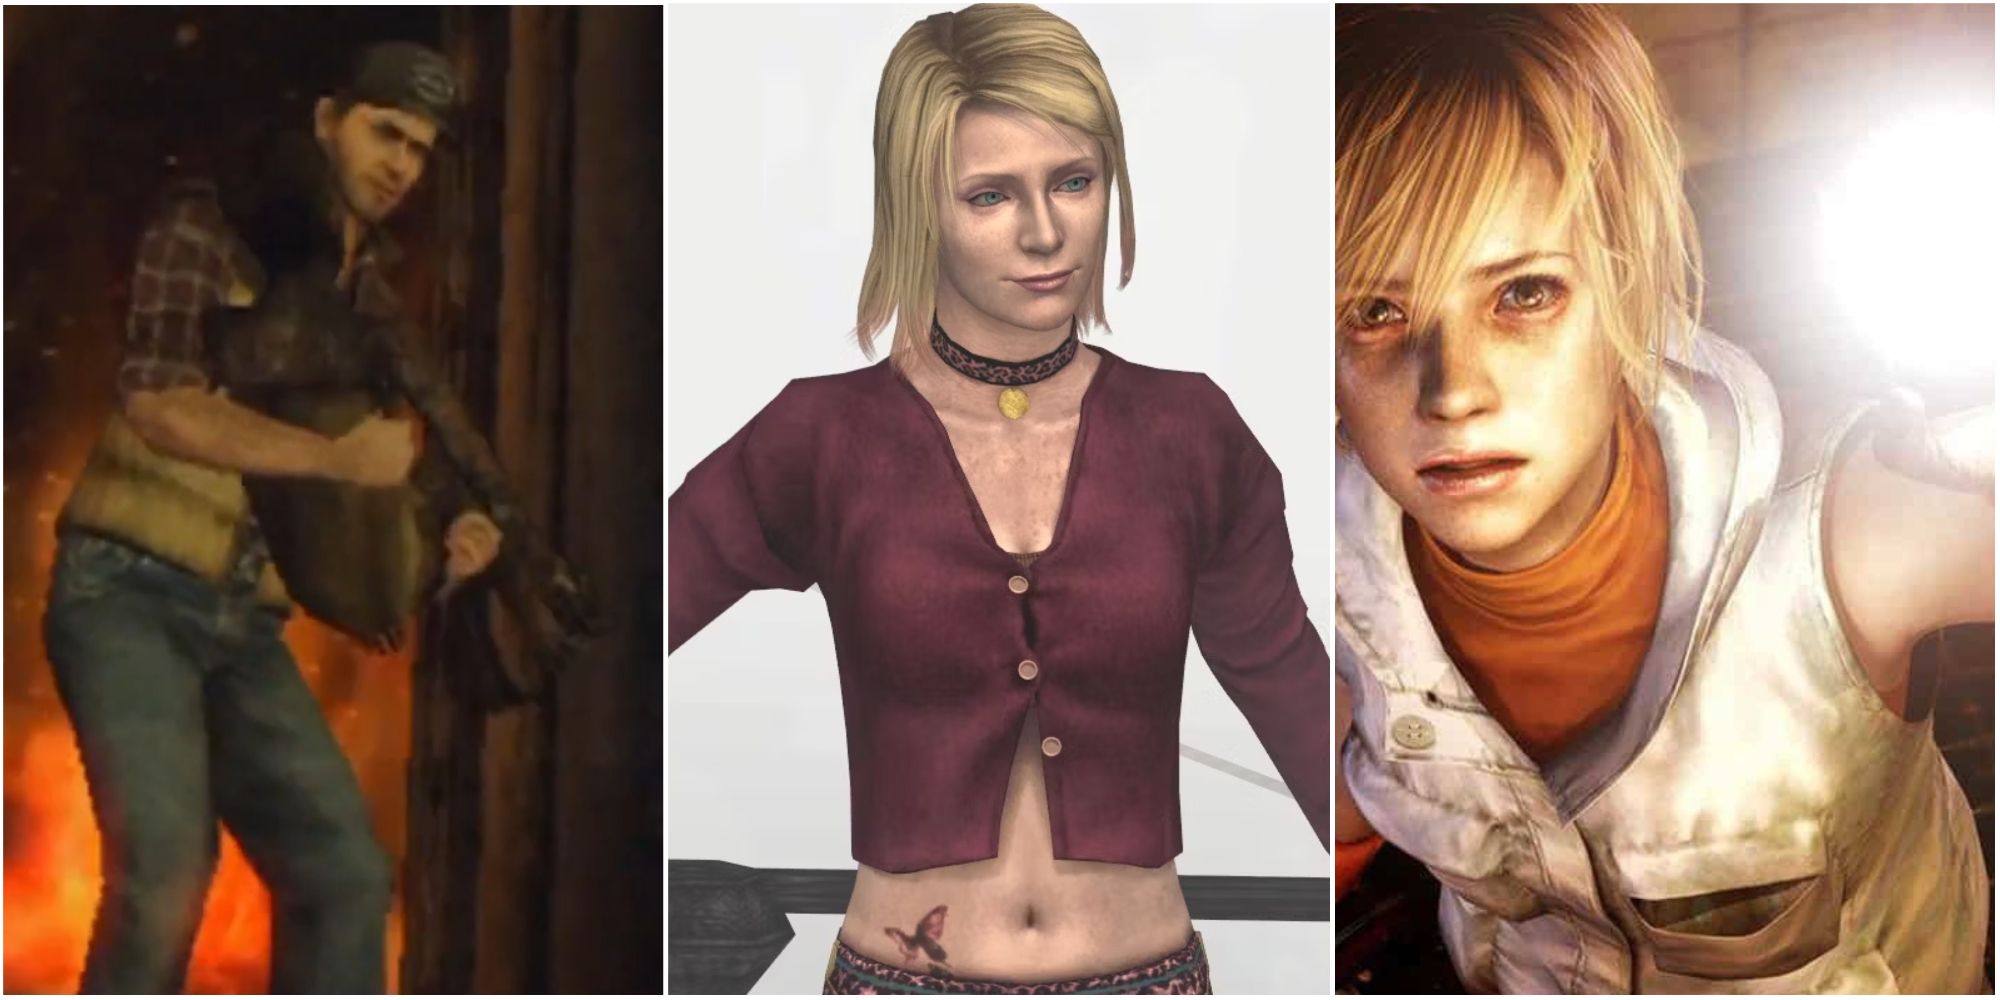 Silent Hill Origins, Silent Hill 2: Born From a Wish, and Silent Hill 3